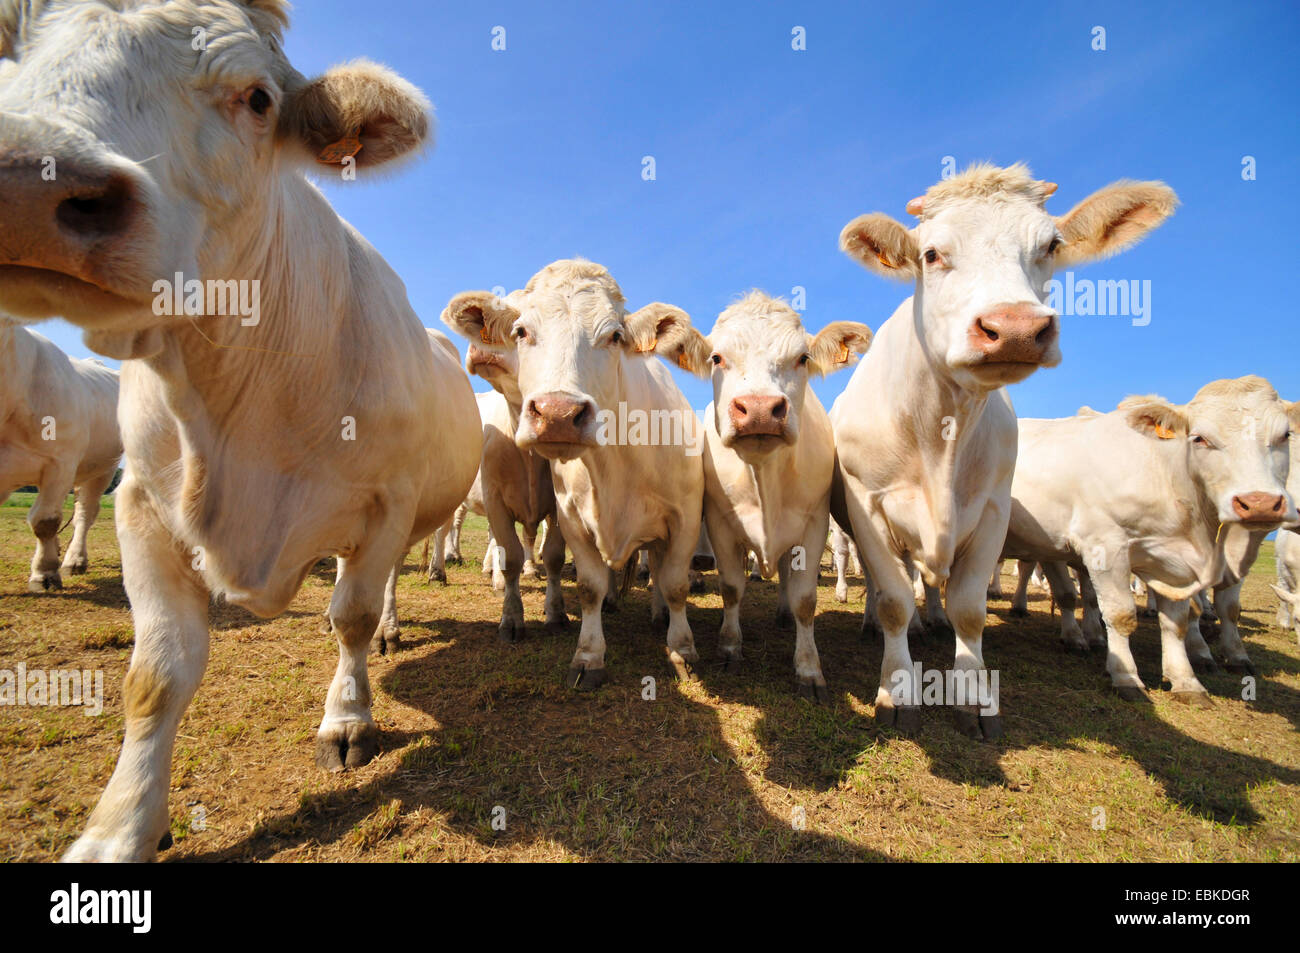 Charolais cattle, domestic cattle (Bos primigenius f. taurus), cattle herd standing on a pasture, France, Brittany, Erquy Stock Photo